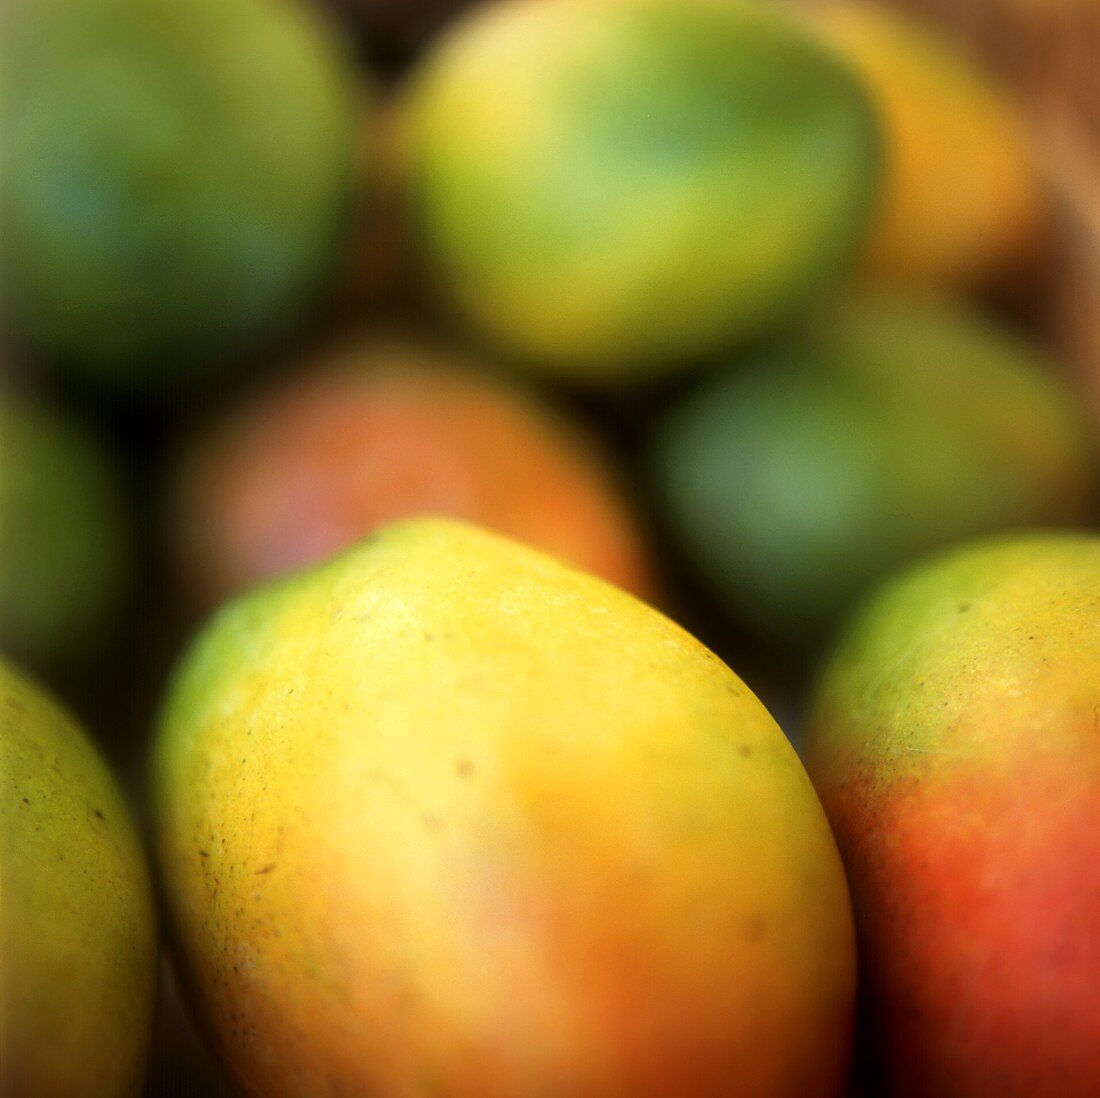 Several mangoes (filling the picture)